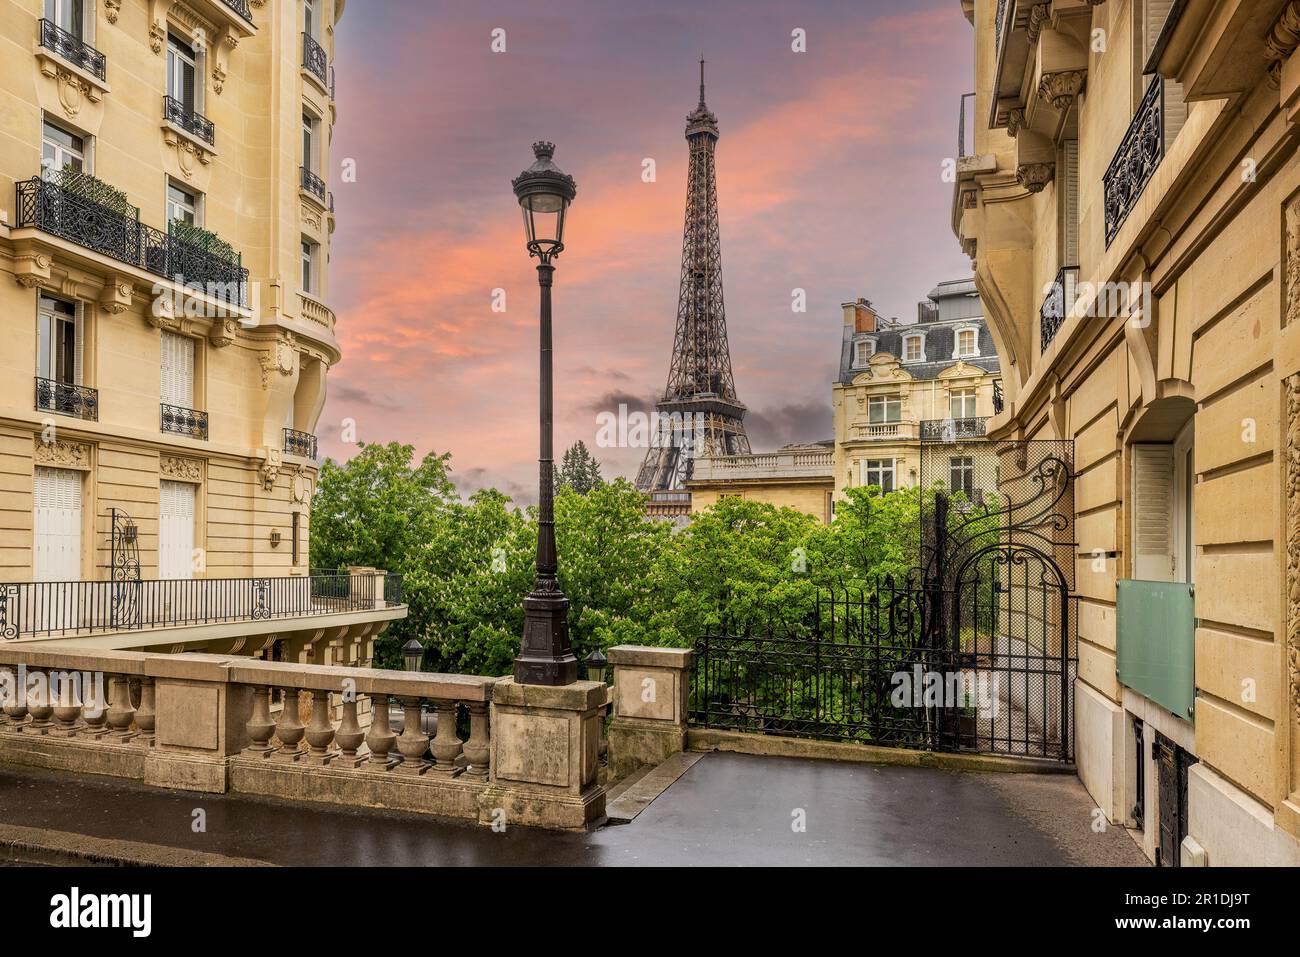 Paris and the Eiffel Tower viewed from central Paris. popular tourist destination. Stock Photo